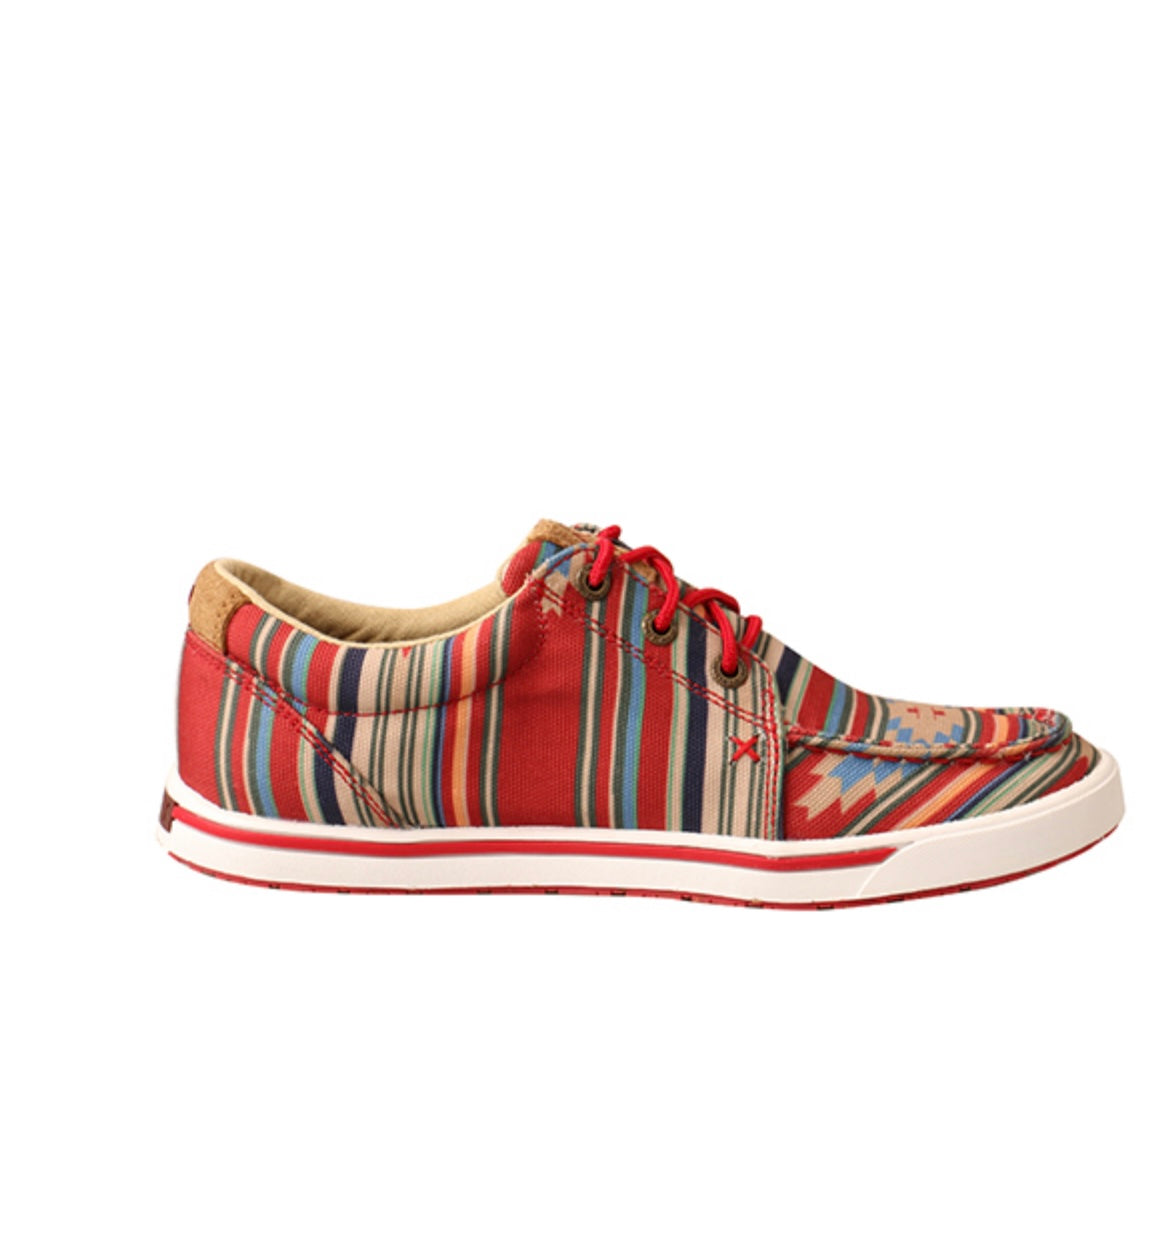 Shoes Women’s No Refund Twisted X WHYC018 Reg. Price $84